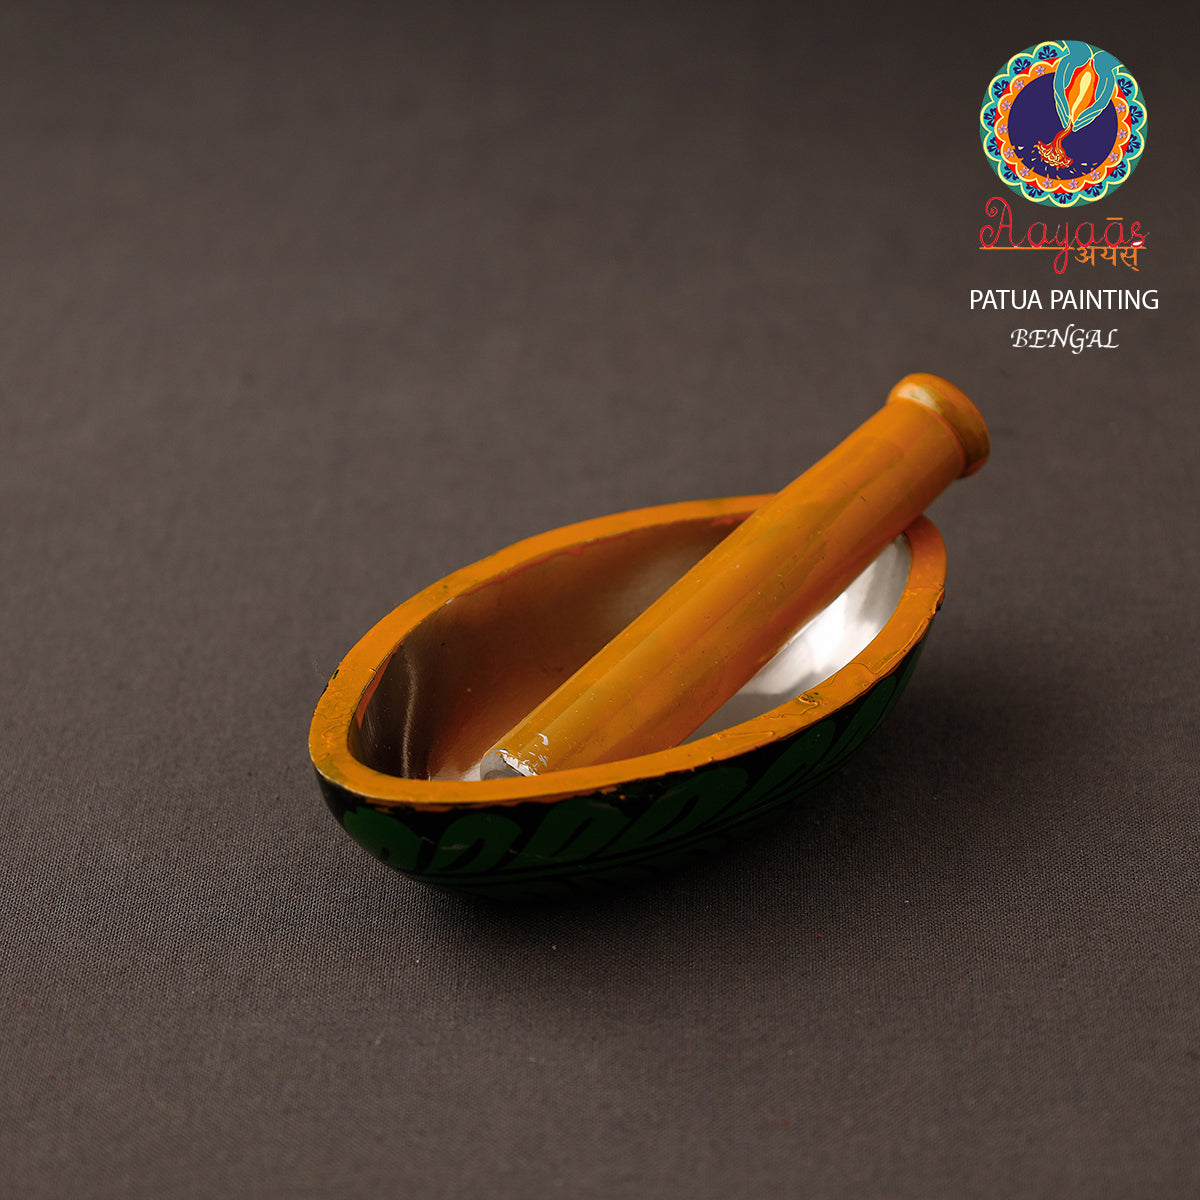 Bengal Patua Handpainted Stainless Steel Mortar And Pestle